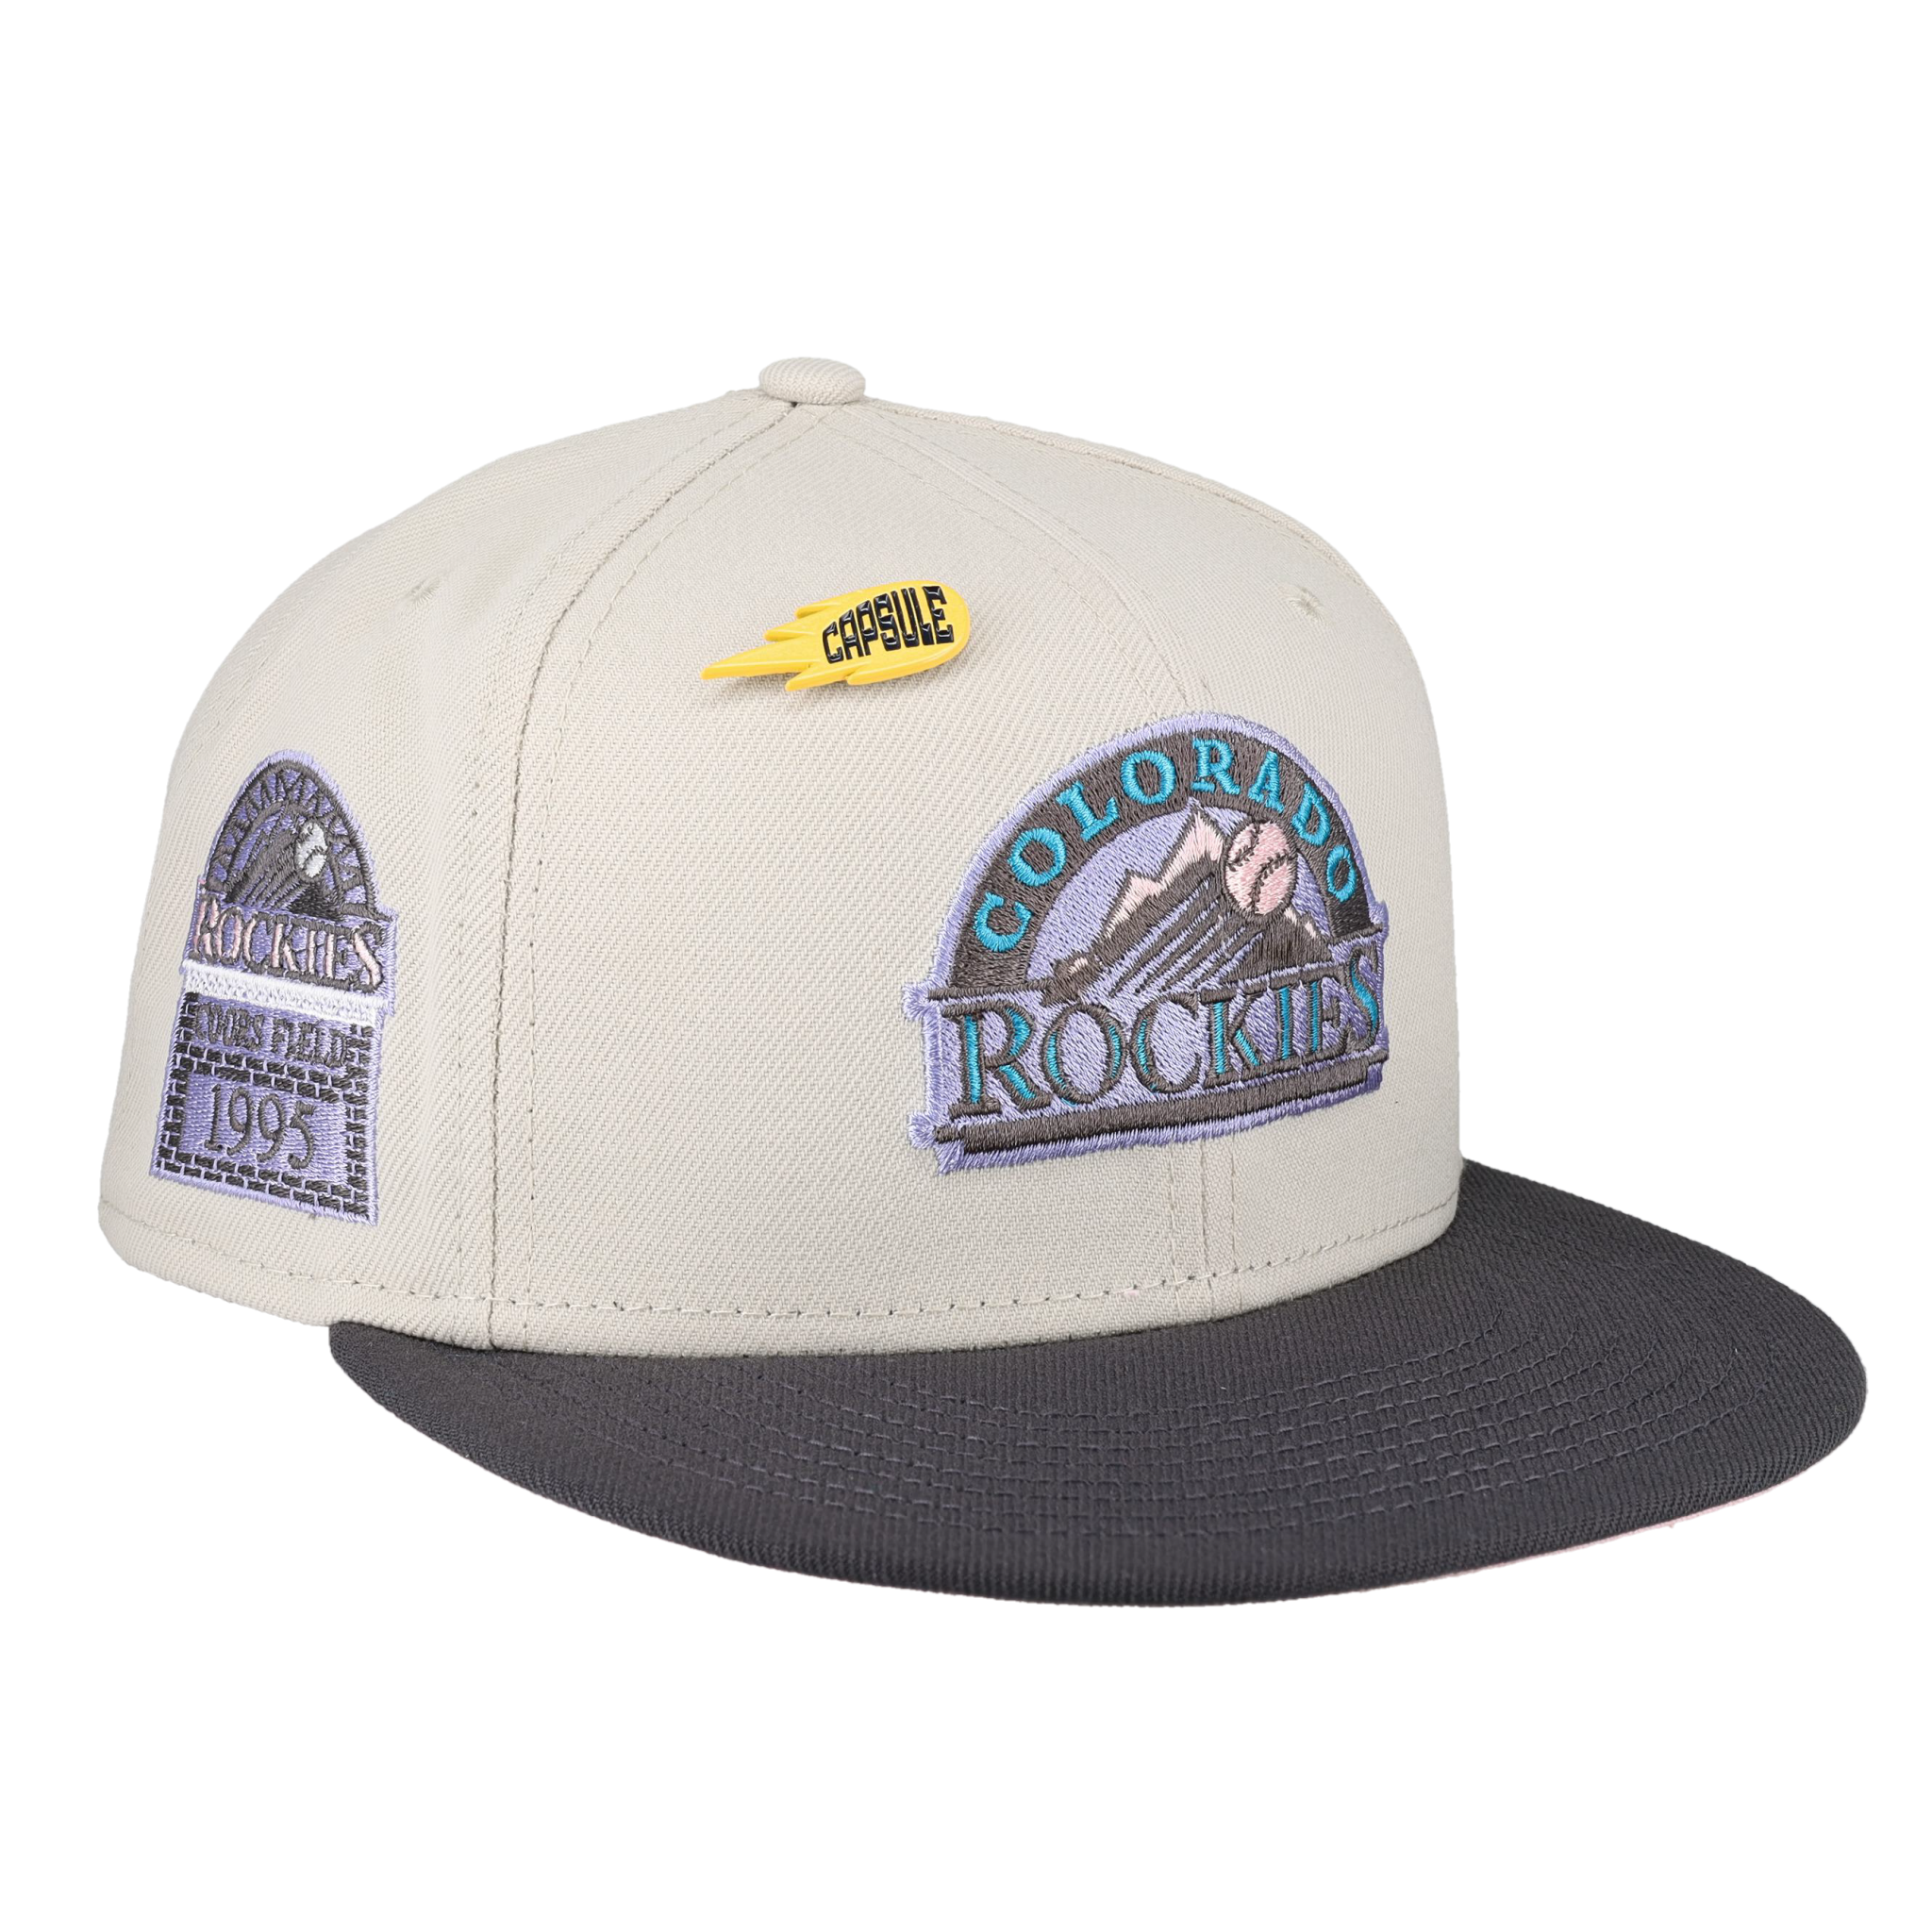 New Era New York Yankees Capsule Comet Collection 2018 All Star Game 59Fifty Fitted Hat Grey/Pink